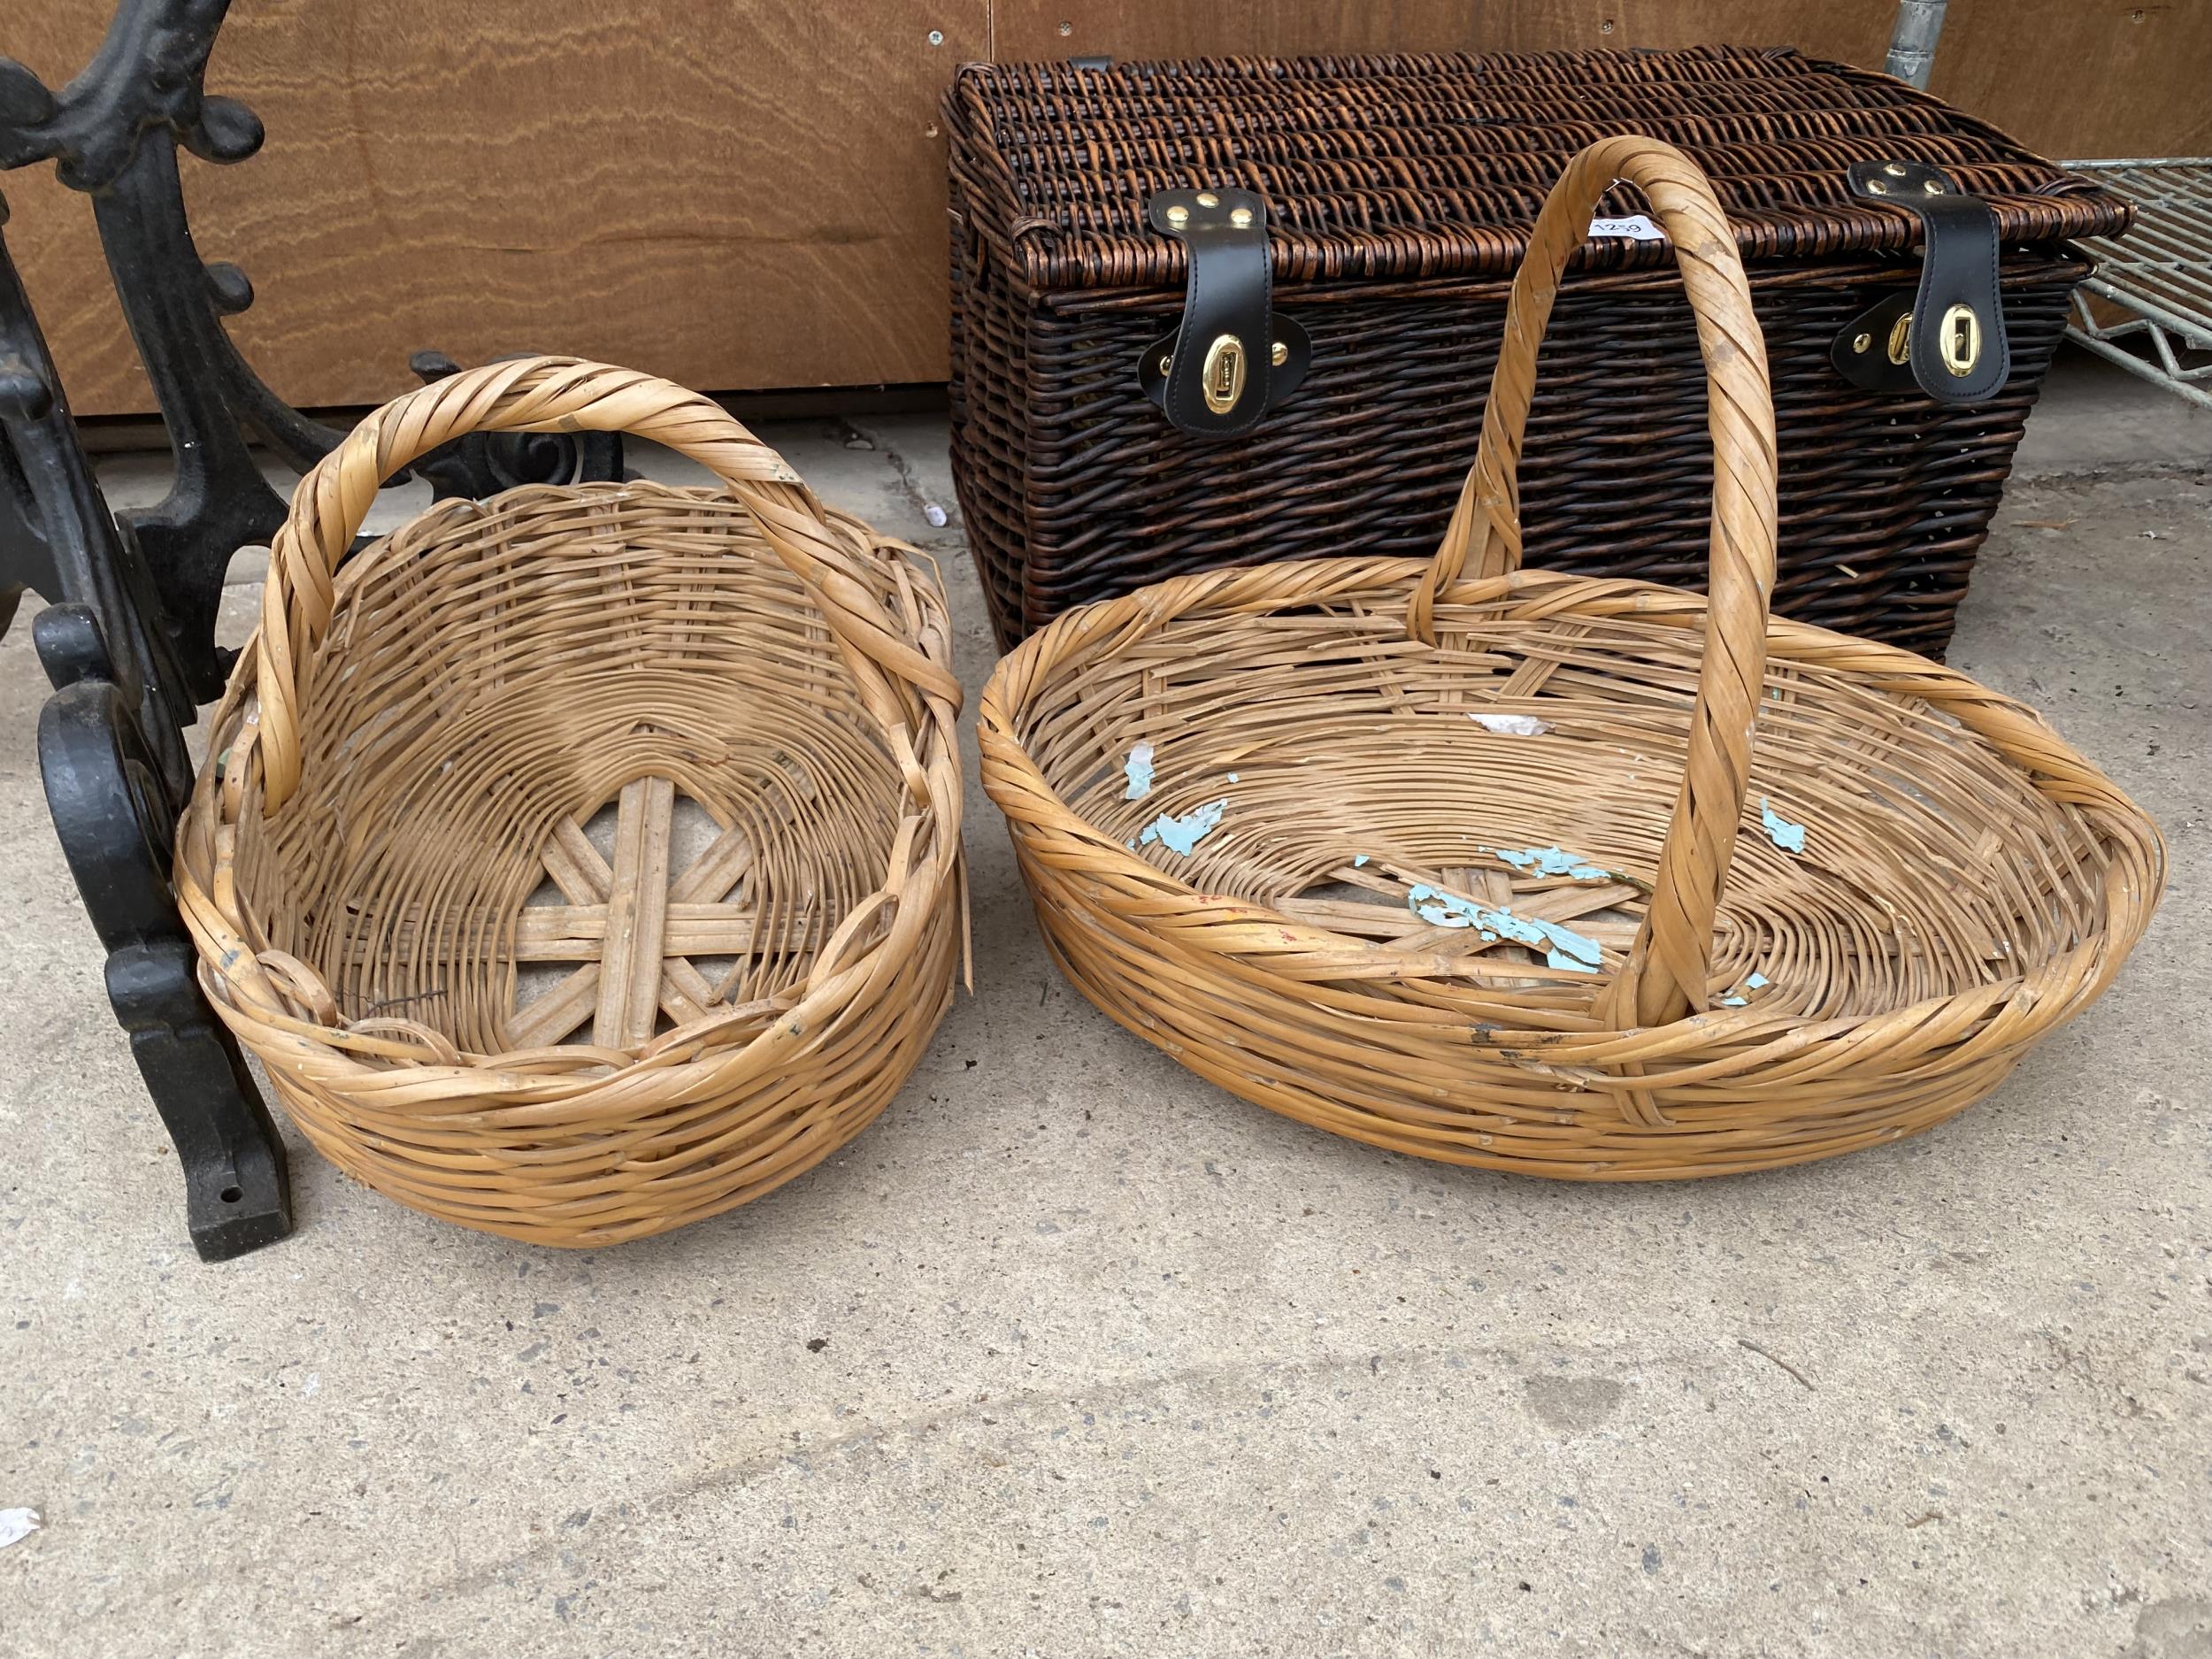 A WICKER PICNIC HAMPER AND TWO FURTHER WICKER BASKETS - Image 2 of 4